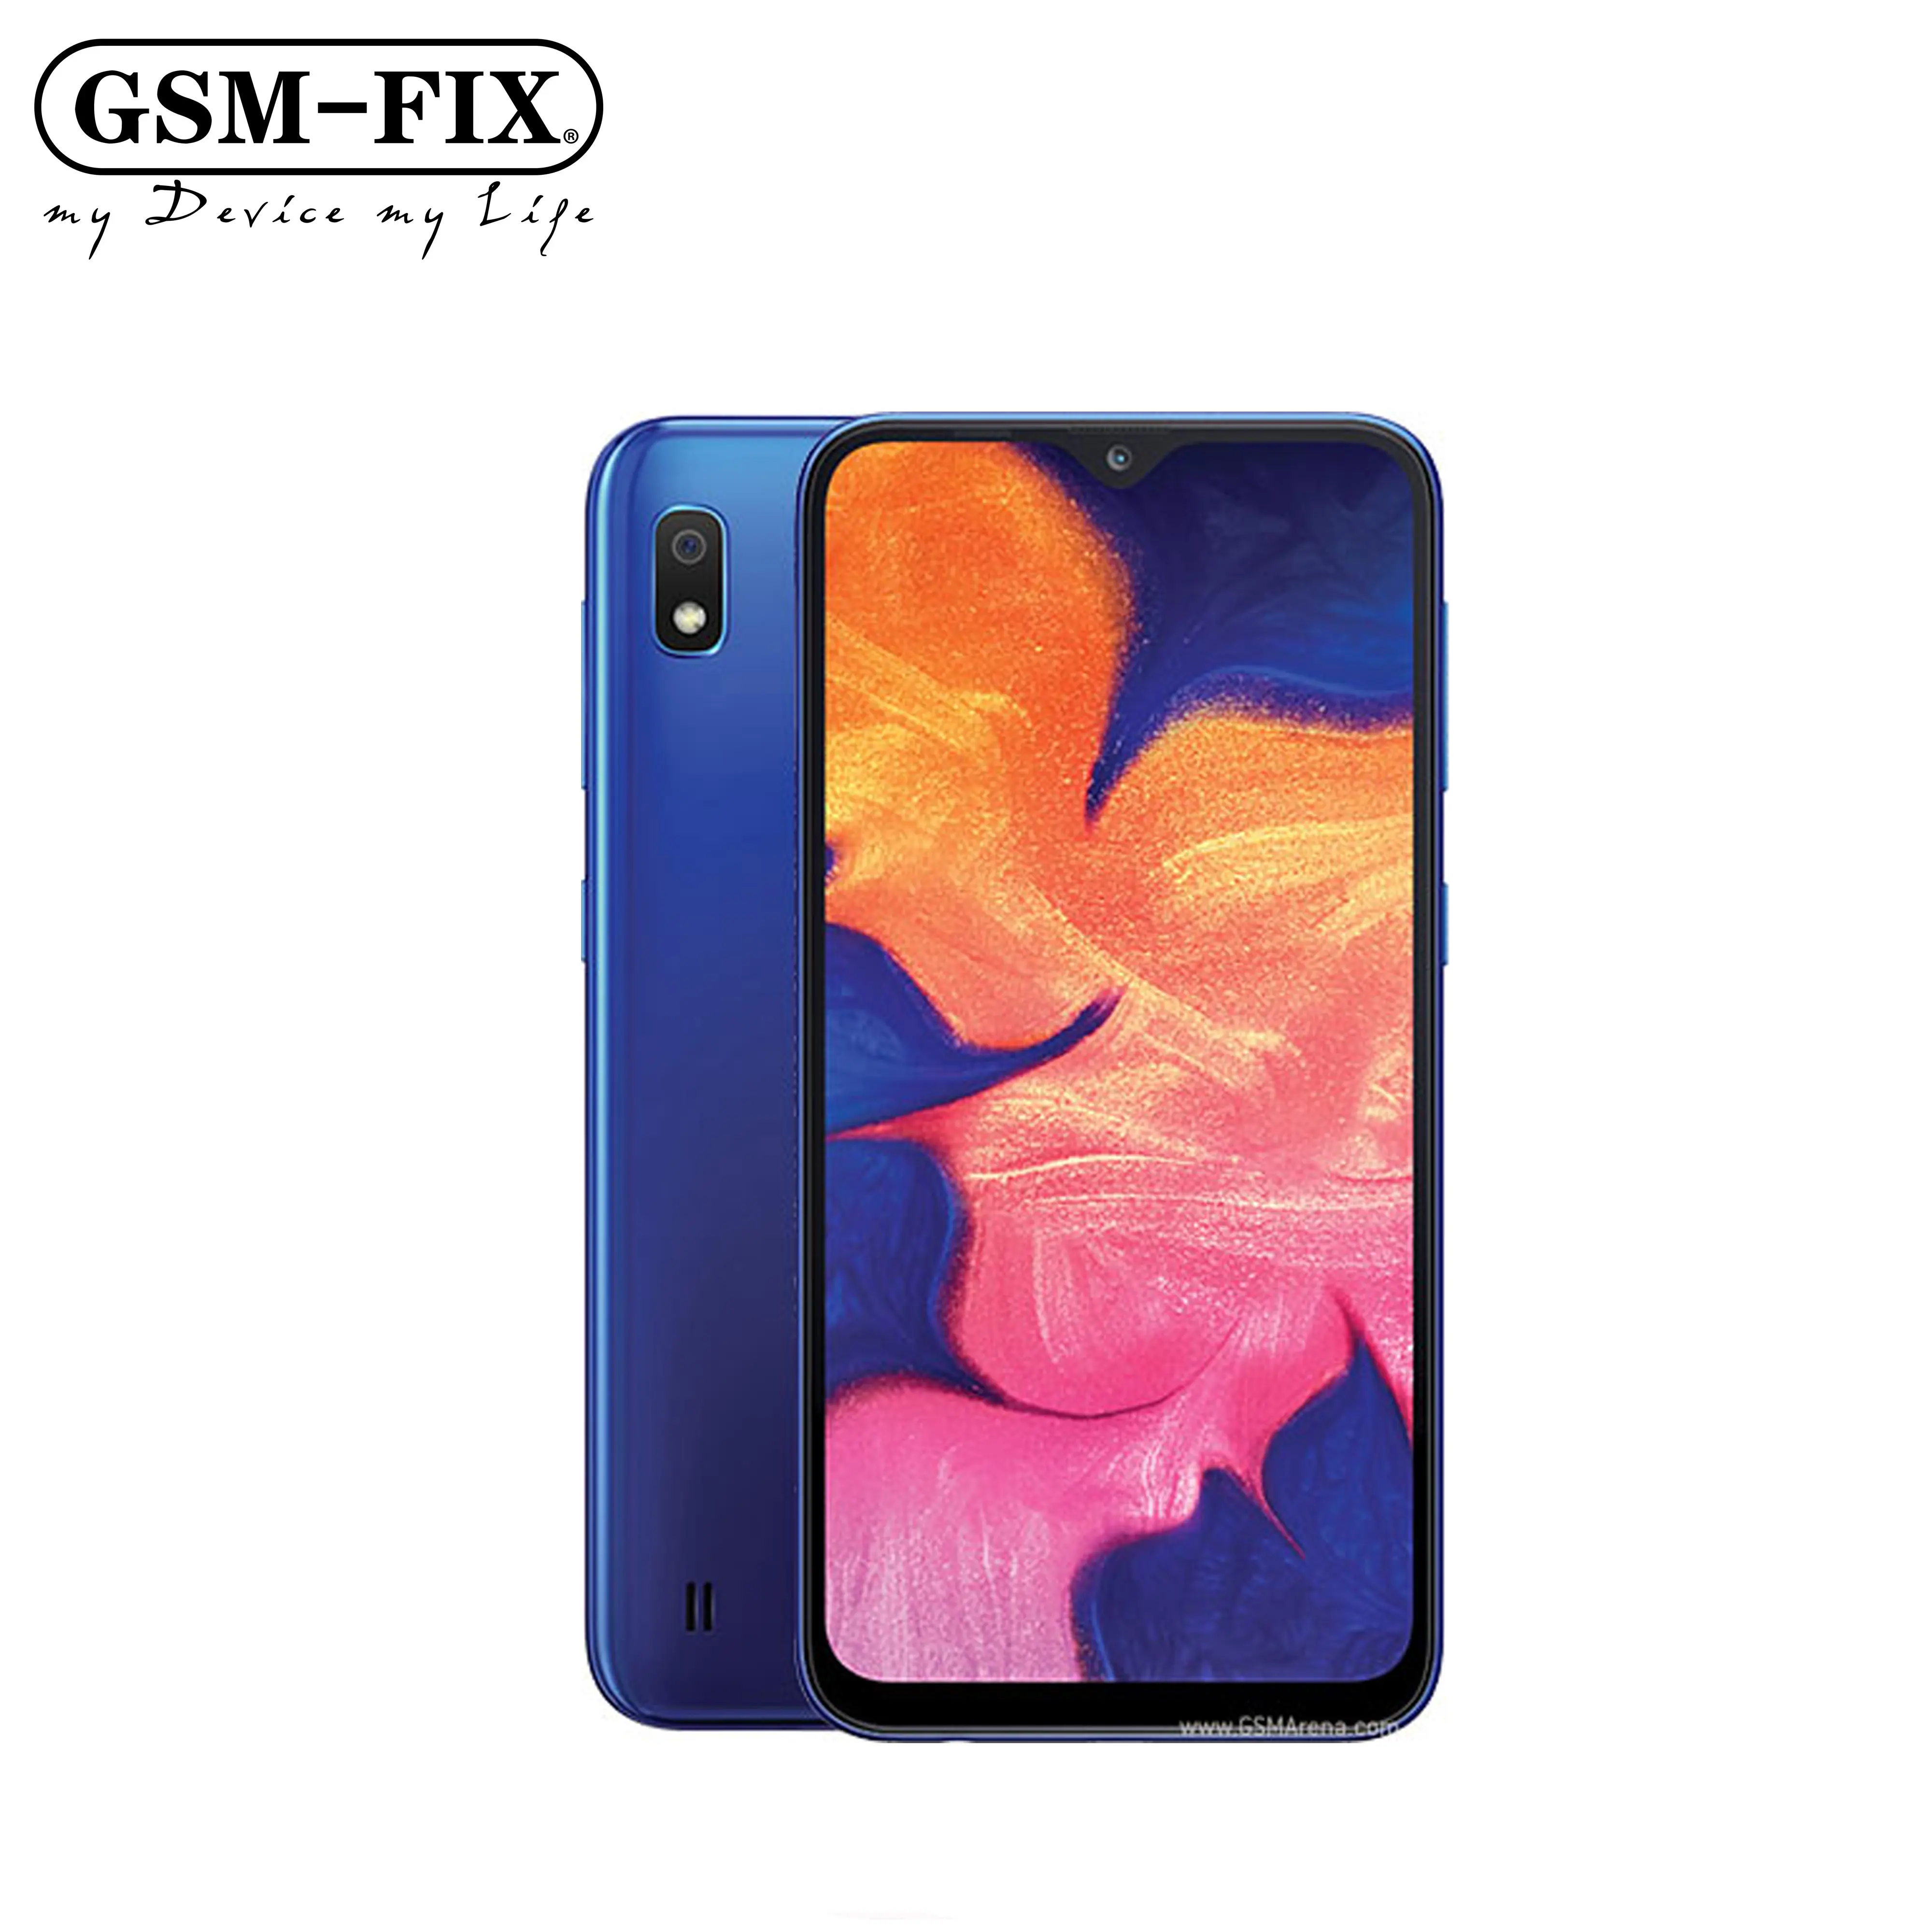 GSM-FIX For Samsung Galaxy A10 A105F Original 6.2Inches Octa-core 2GB RAM 32GB ROM 13MP 2 SIM LTE Android Unlocked Mobile Phone